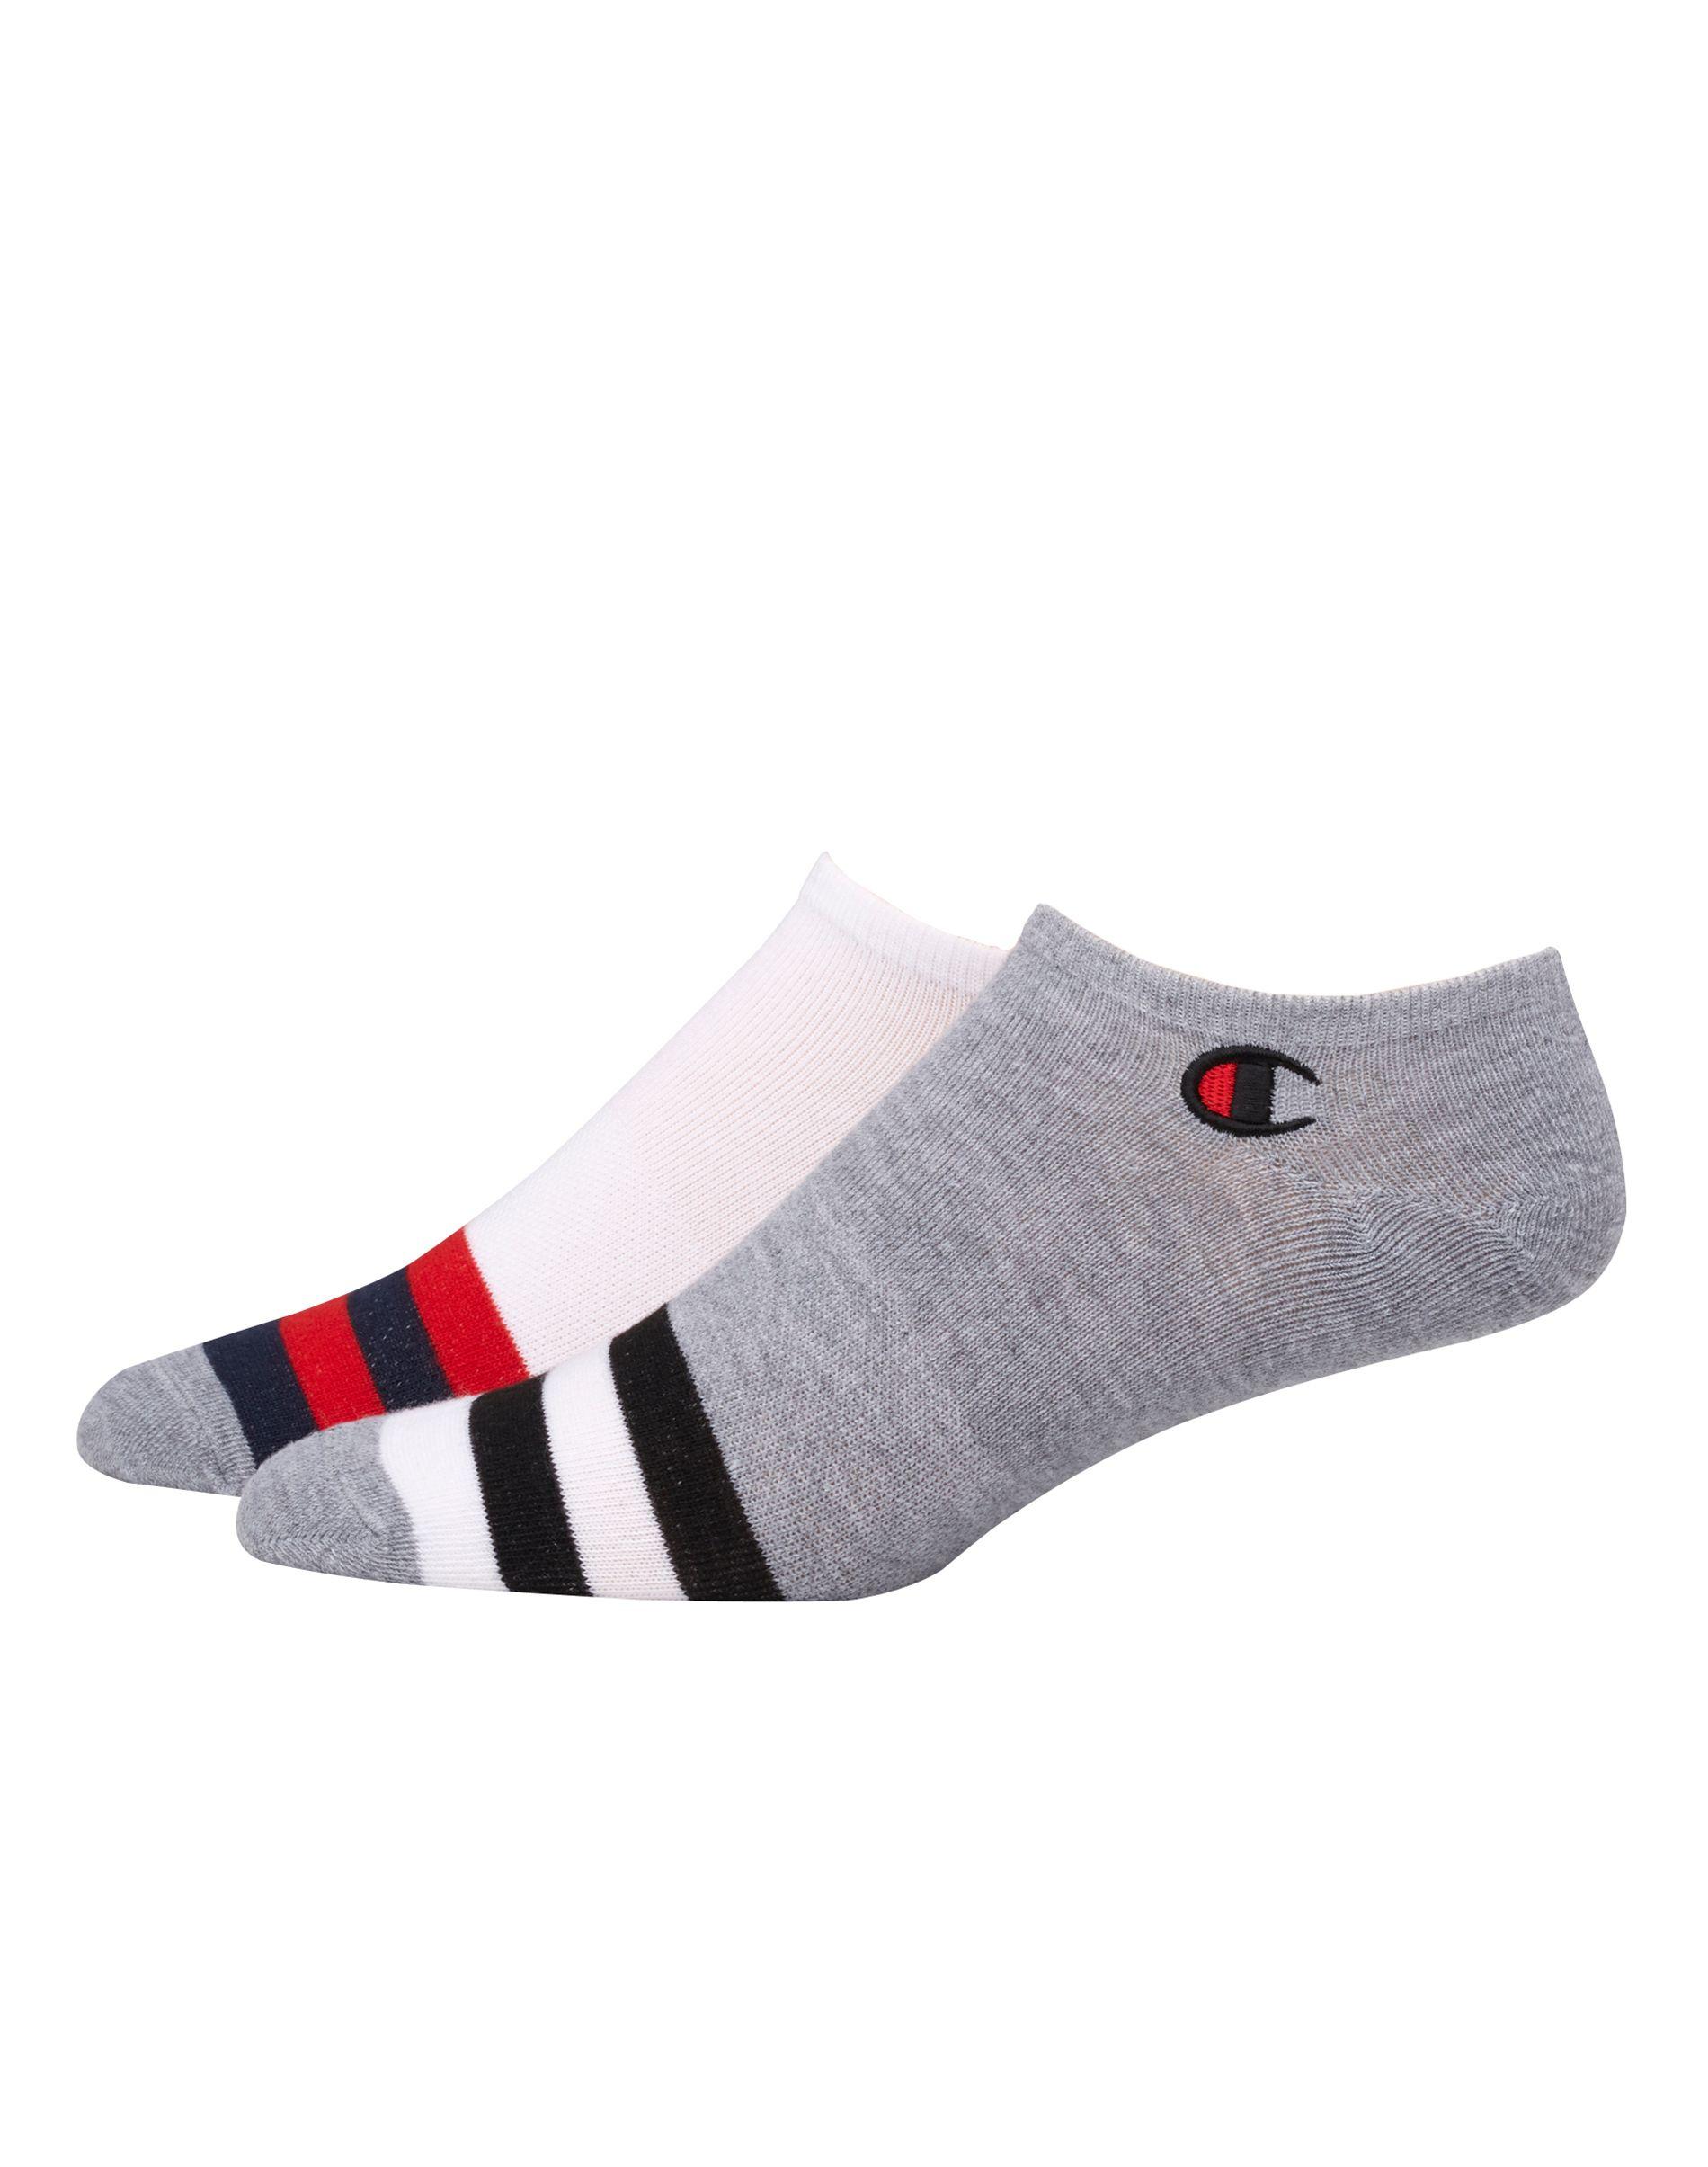 Champion Performance Super No-show Socks, 2-pack in Gray for Men - Lyst